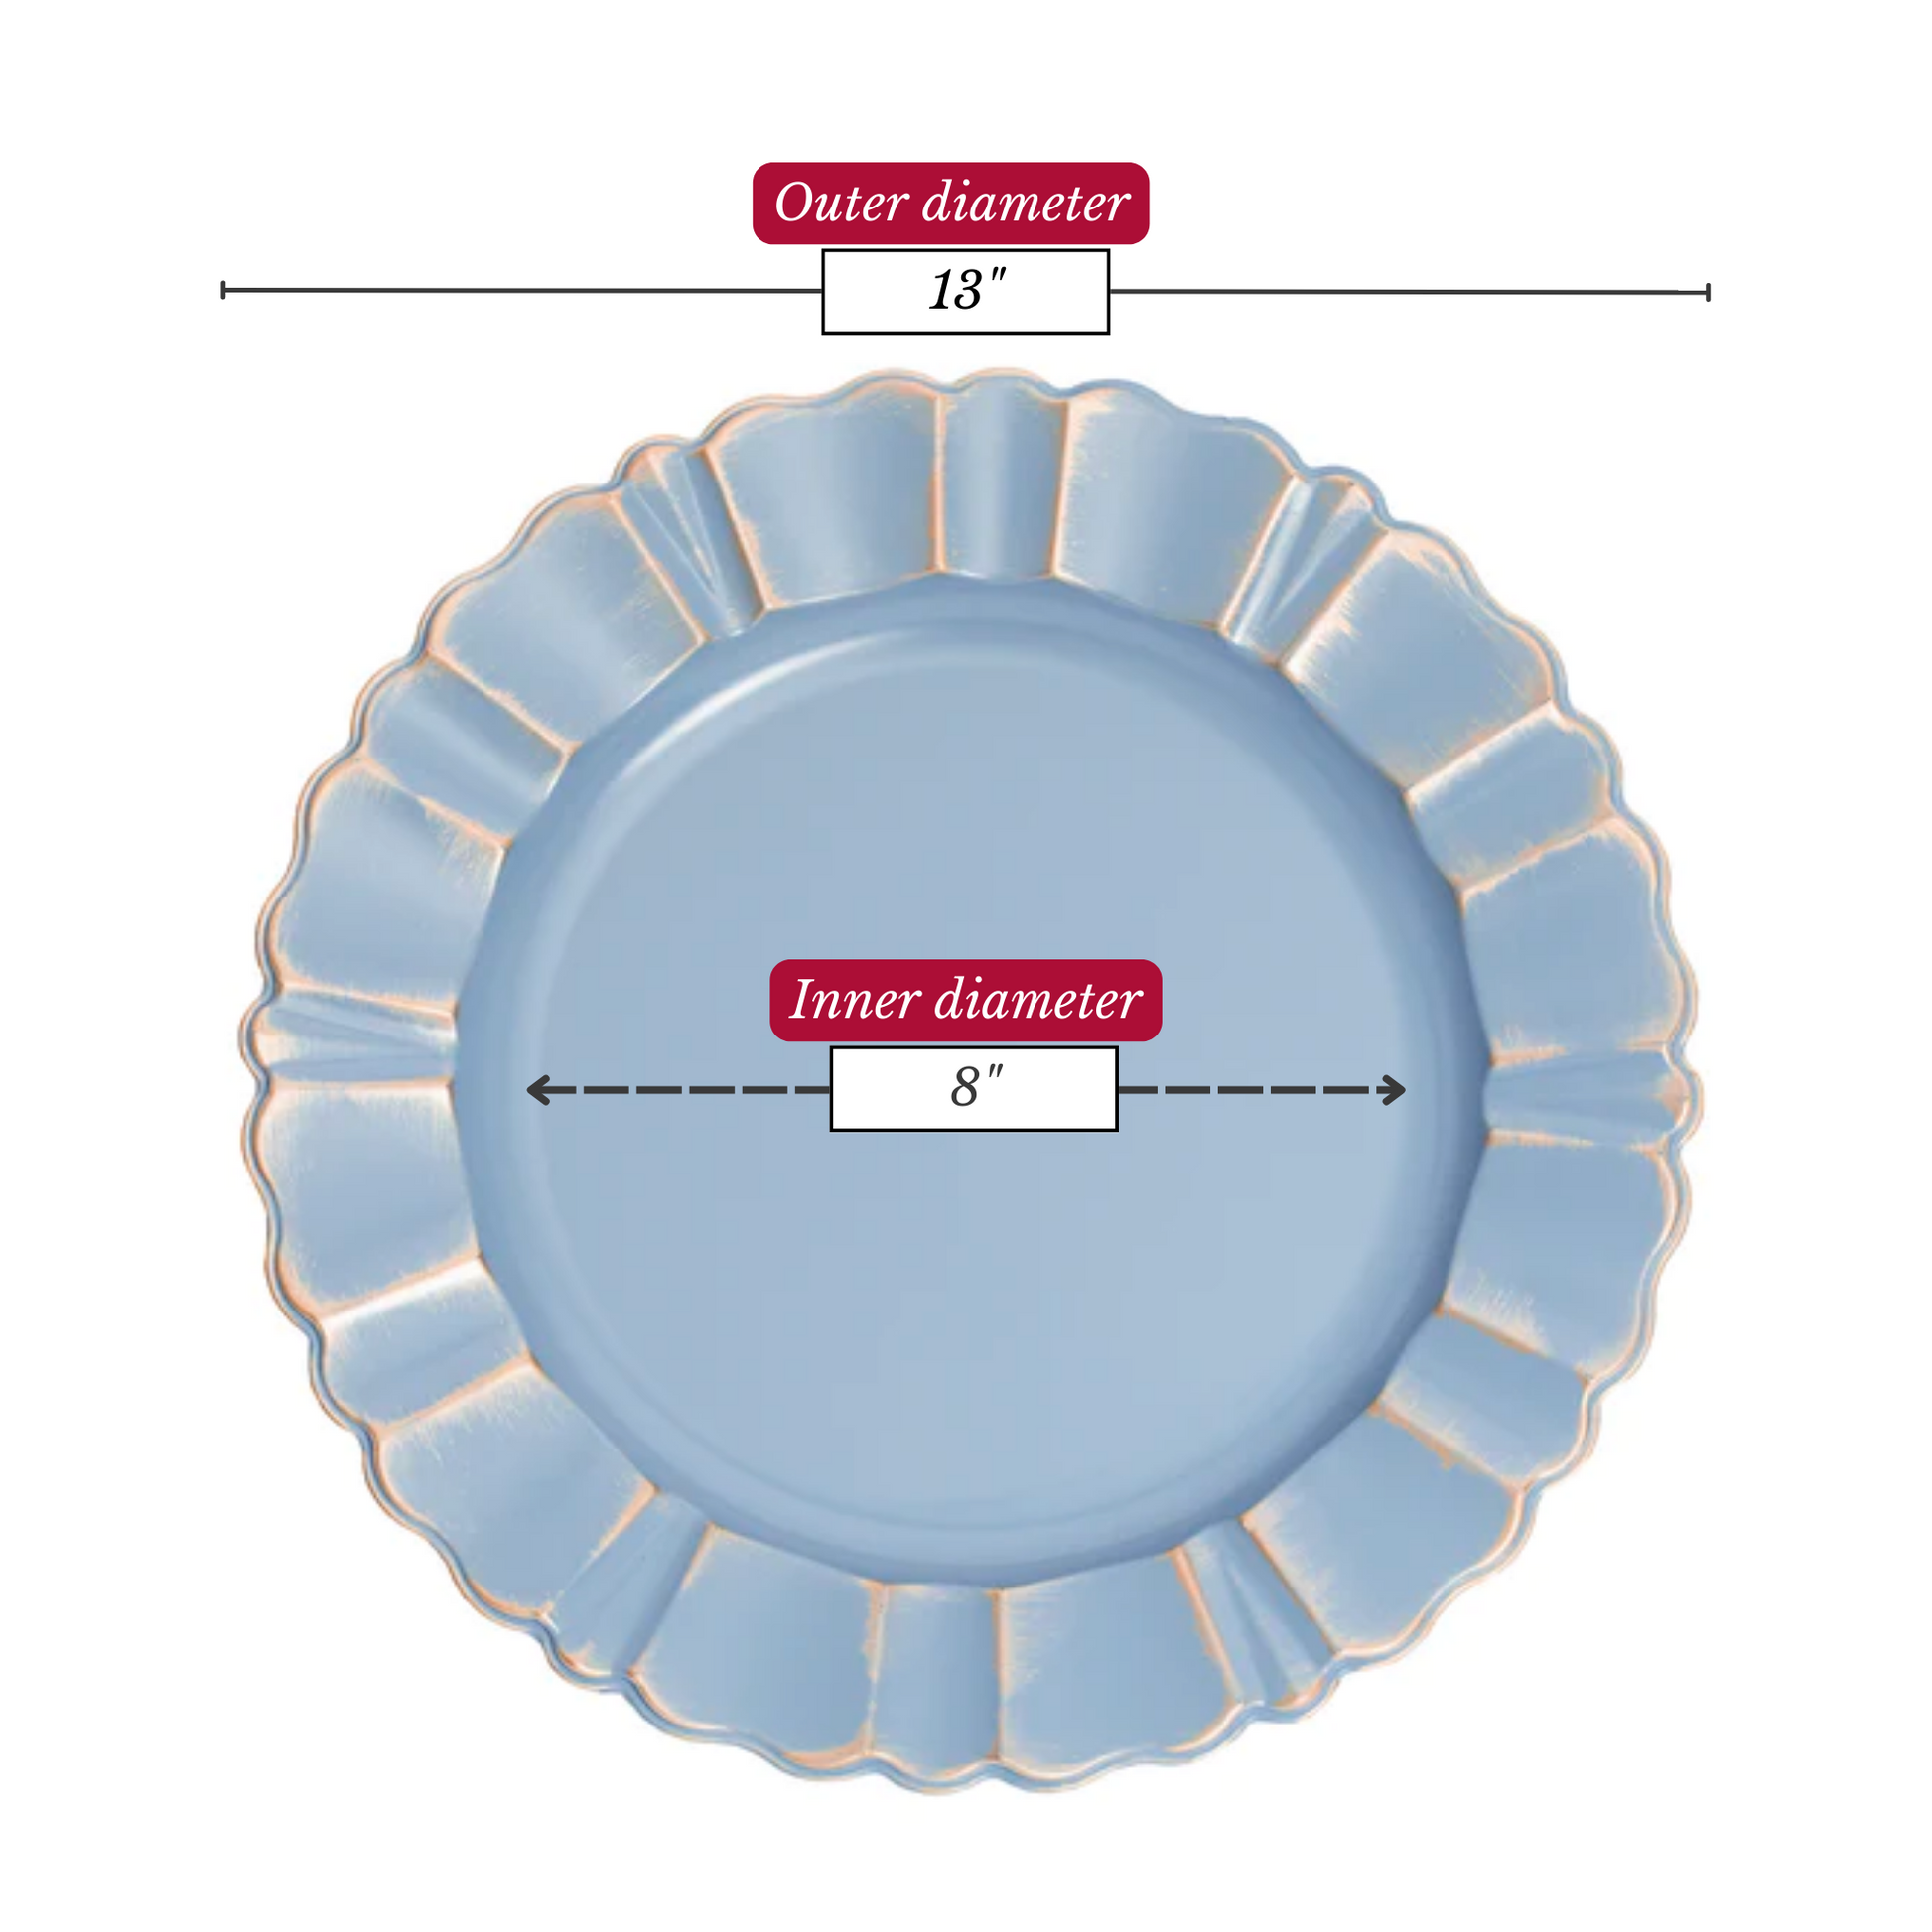 Waved Scalloped Acrylic 13" Charger Plate - Dusty Blue & Gold